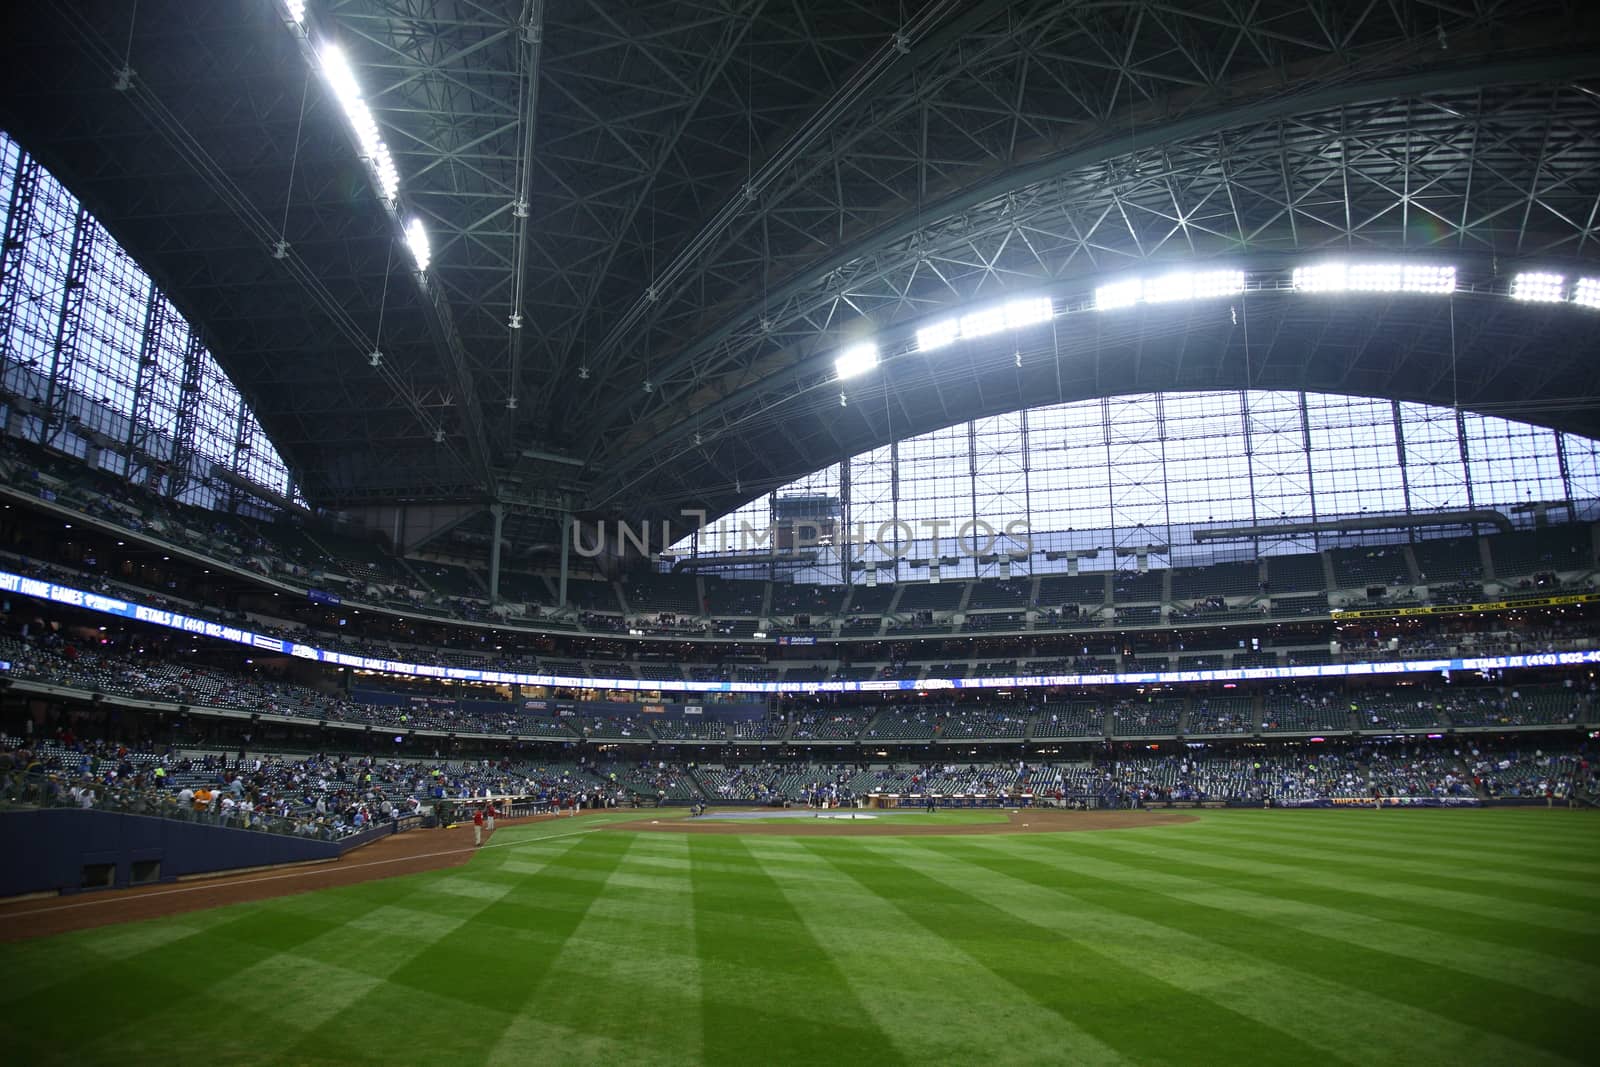 Brewers fans await a baseball game at Miller Park against the Chicago Cubs under a closed dome.